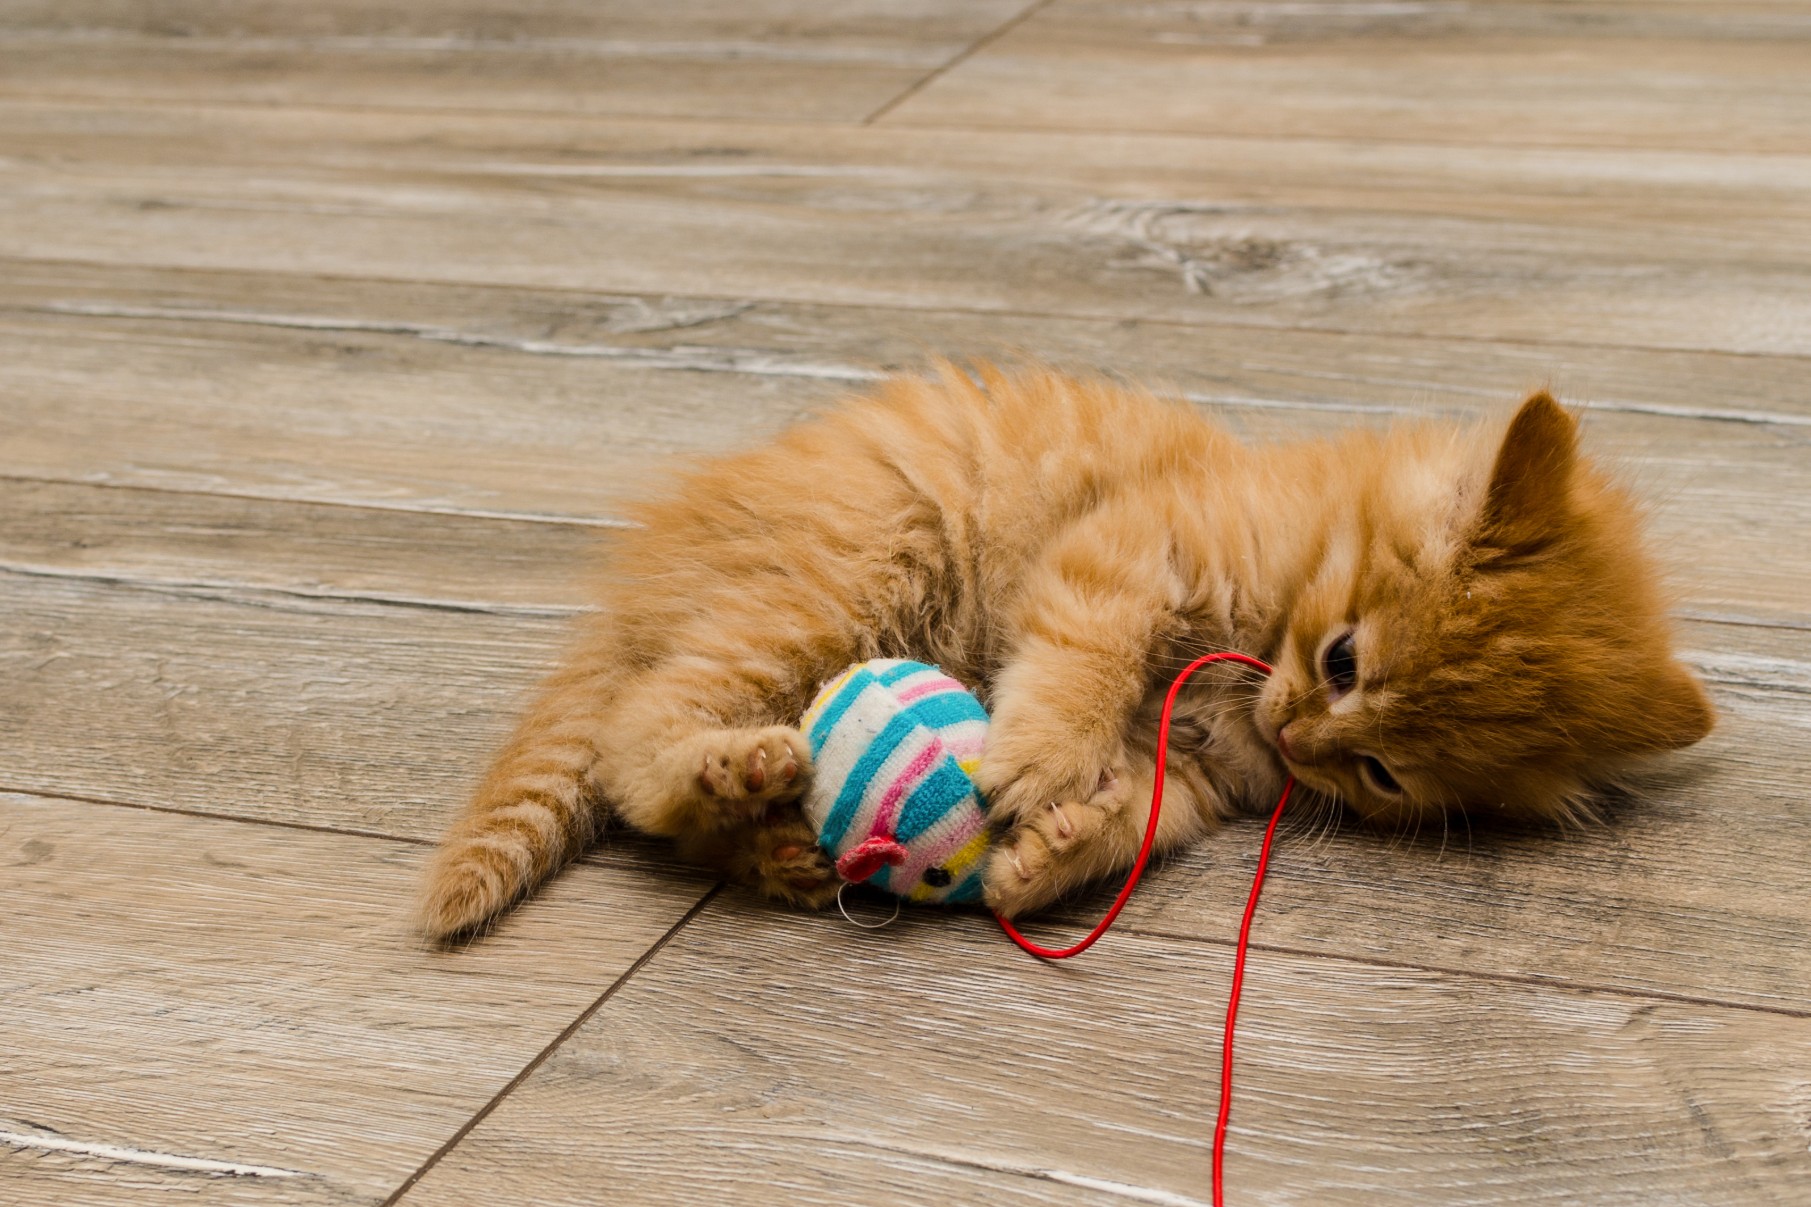 Striped cat playing with a toy